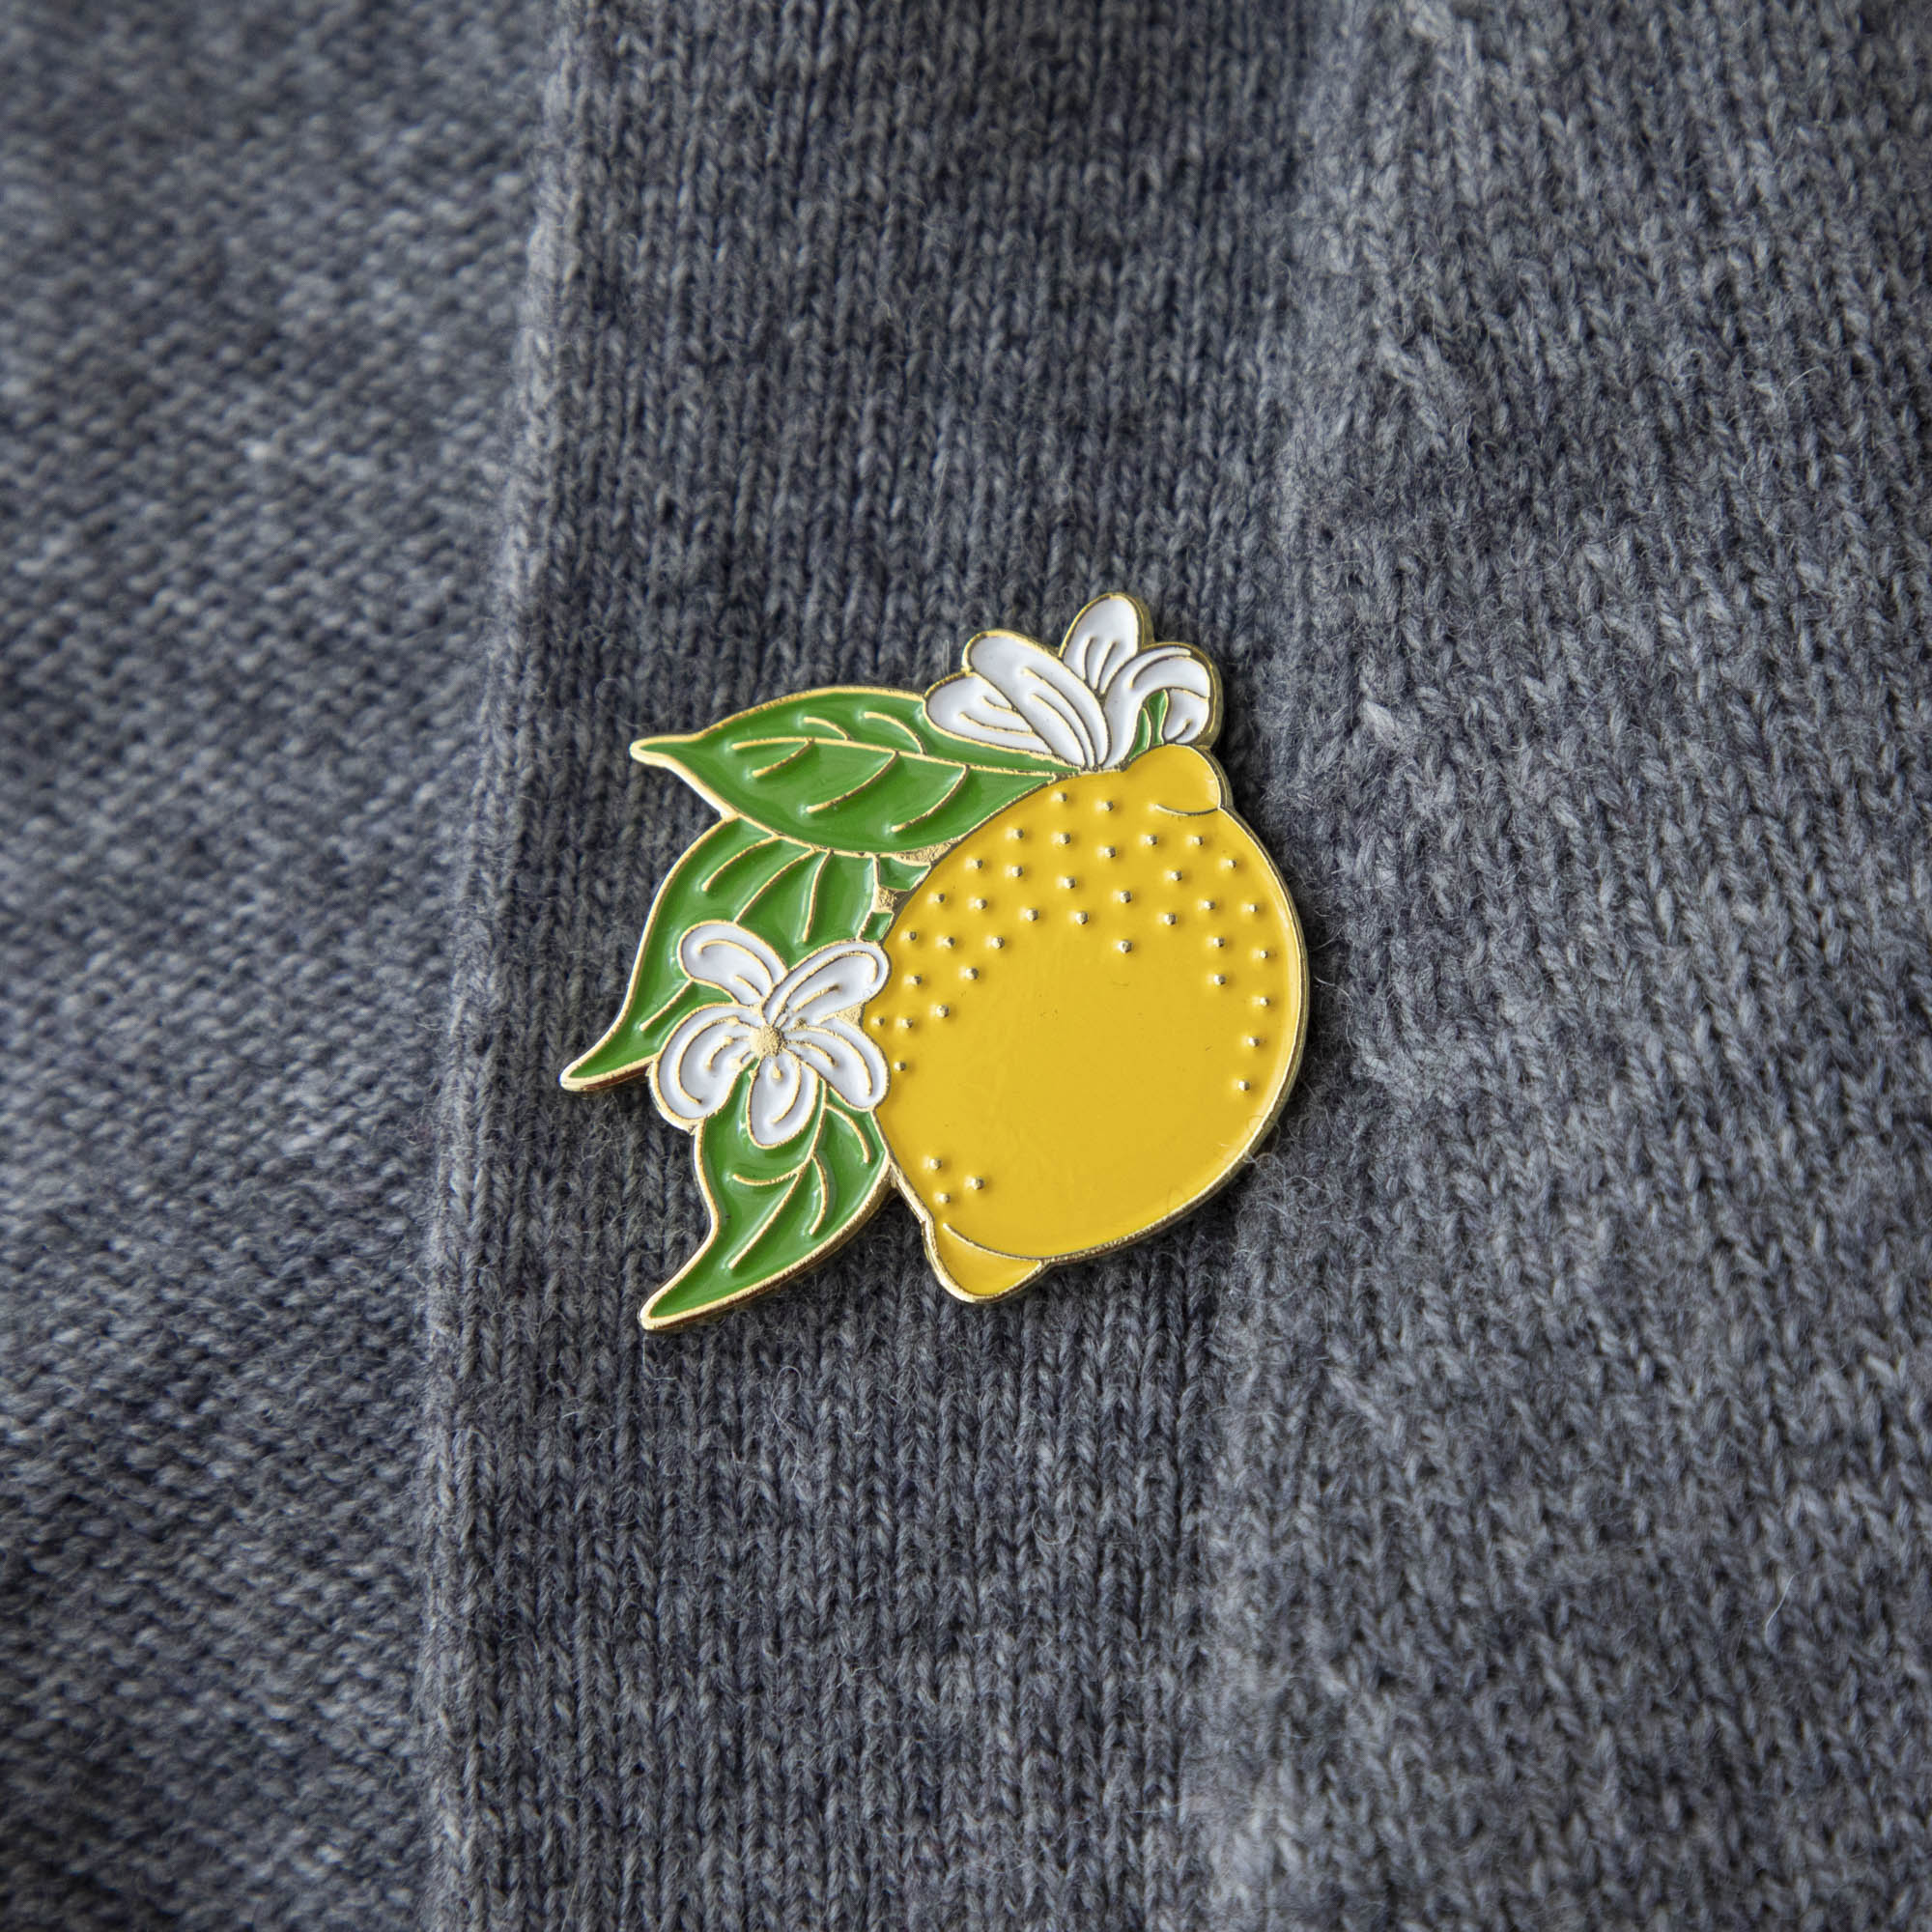 A Lemon Enamel Pin from Hester &amp; Cook adorns the front of a stylish gray sweater.